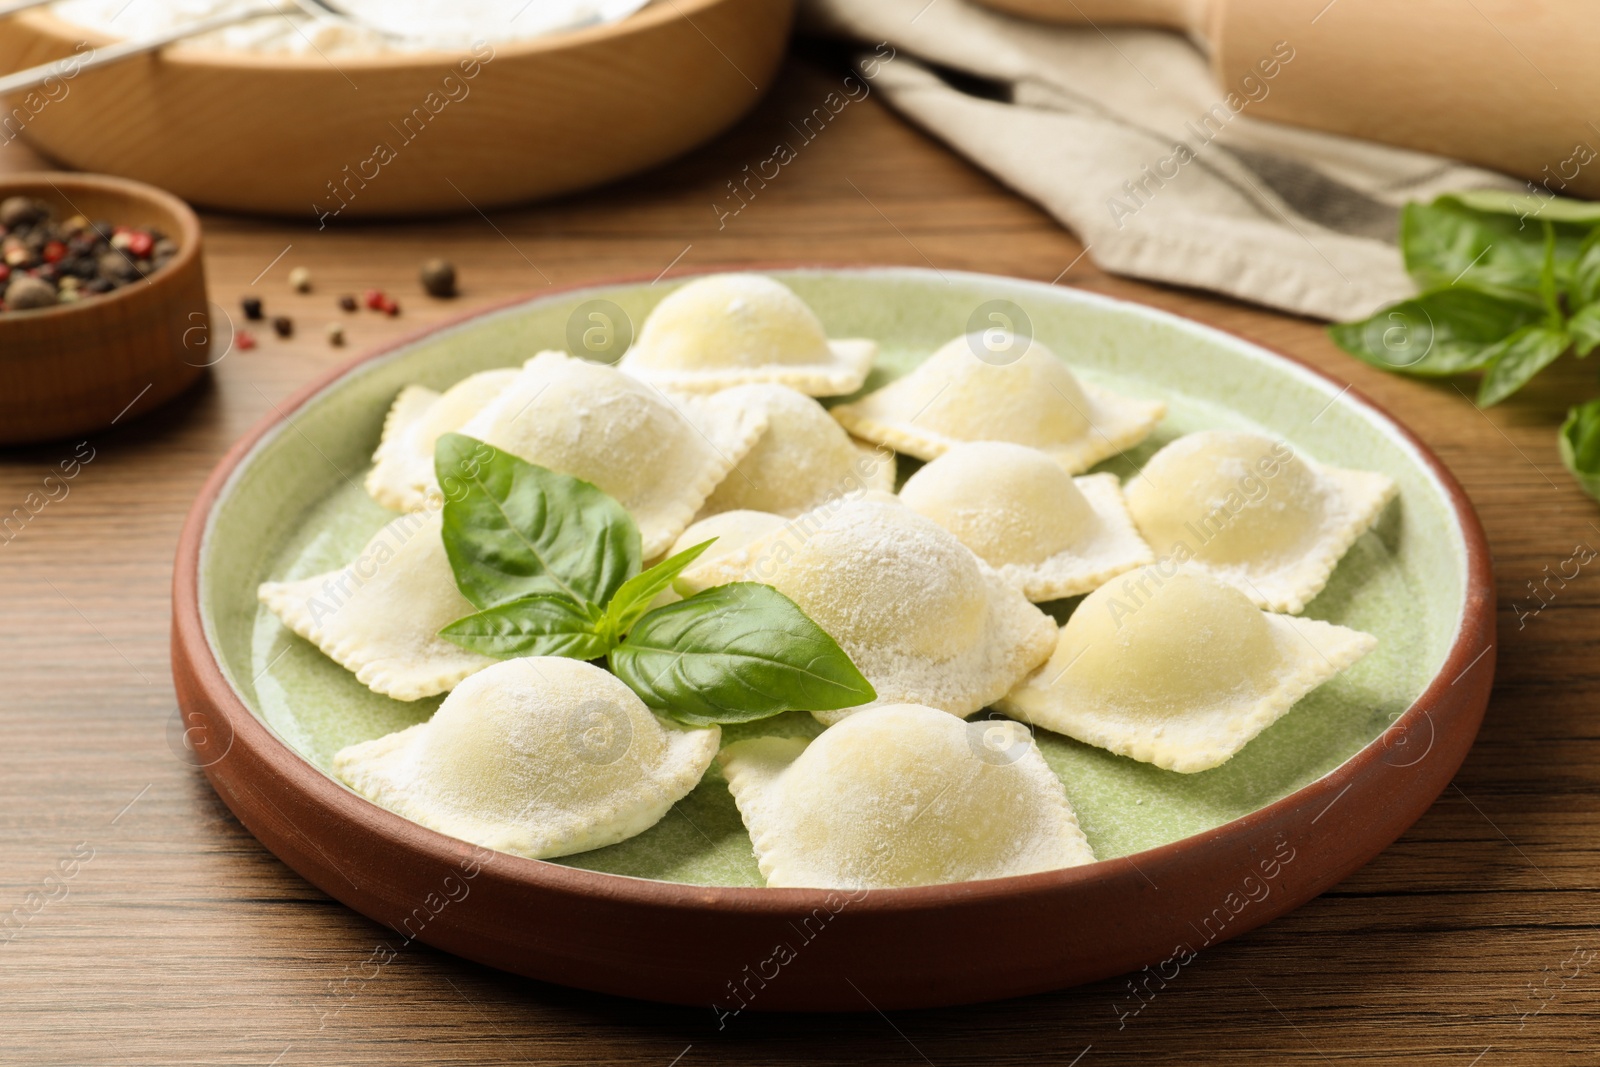 Photo of Uncooked ravioli and basil on wooden table